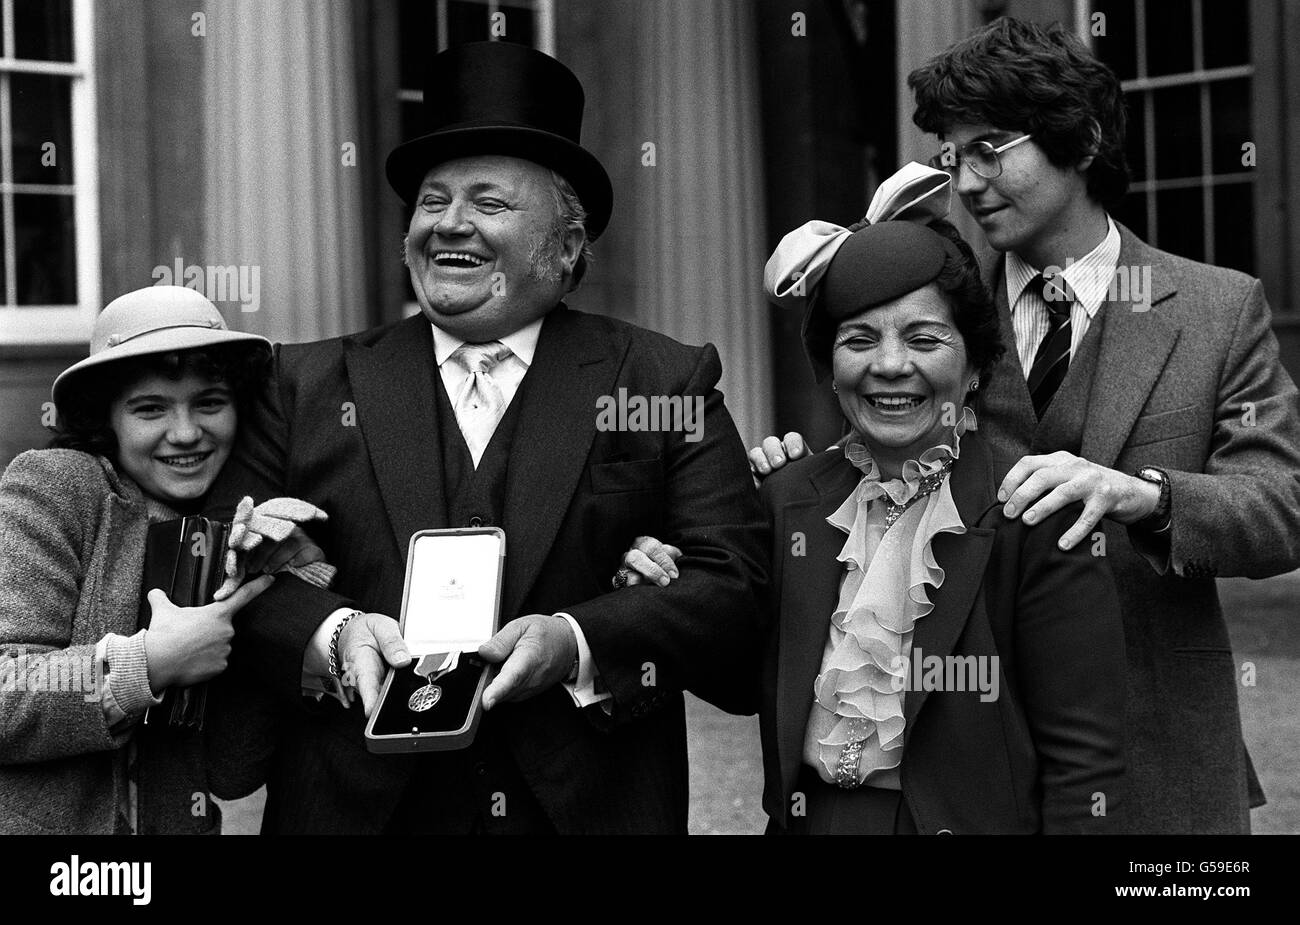 PA PHOTO 10/11/1981: SIR HARRY SECOMBE AFTER HIS INVESTITURE BY THE QUEEN AT BUCKINGHAM PALACE. WITH HIM (LEFT TO RIGHT) ARE 14 YEAR OLD DAUGHTER KATY, HIS WIFE MYRA AND THEIR 19 YEAR OLD SON DAVID. * 11/4/2001: Comedy legend Sir Harry died Wednesday April 11, 2001, his daughter Jenny Secombe has said. Stock Photo